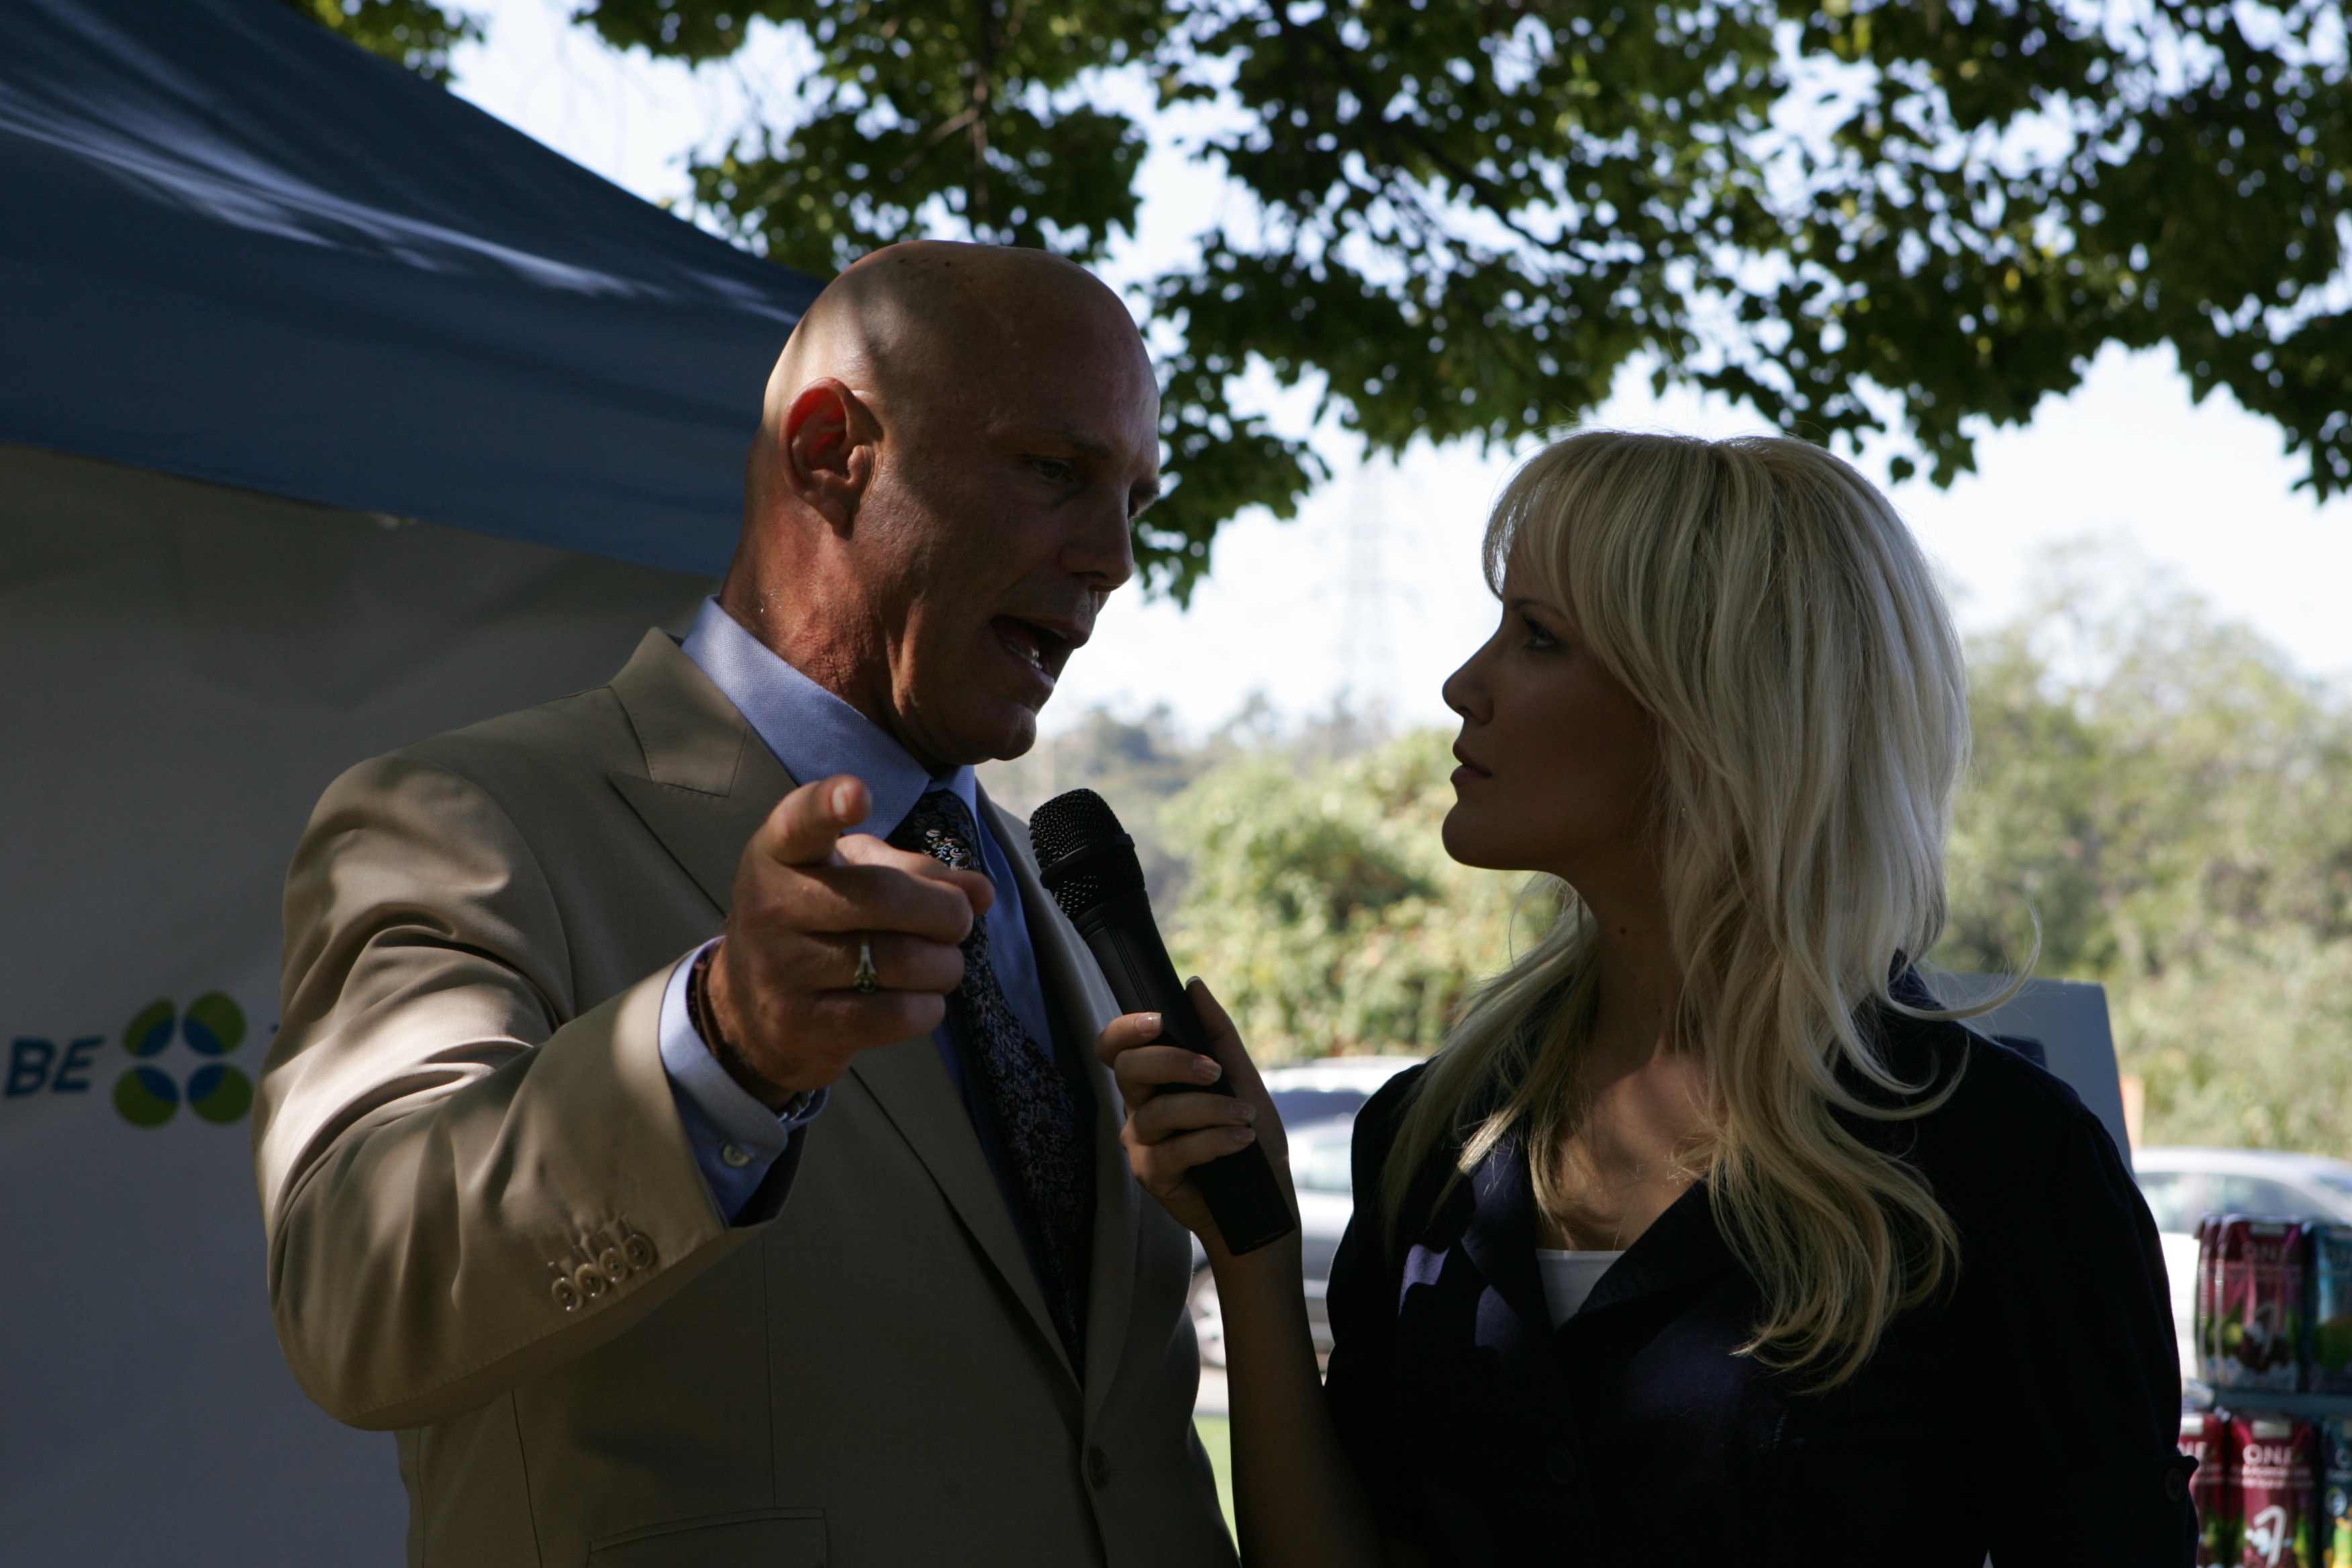 Danika Quinn interviewing Hollywood Celebrity Sporting Clays Event founder, Patrick Kilpatrick.